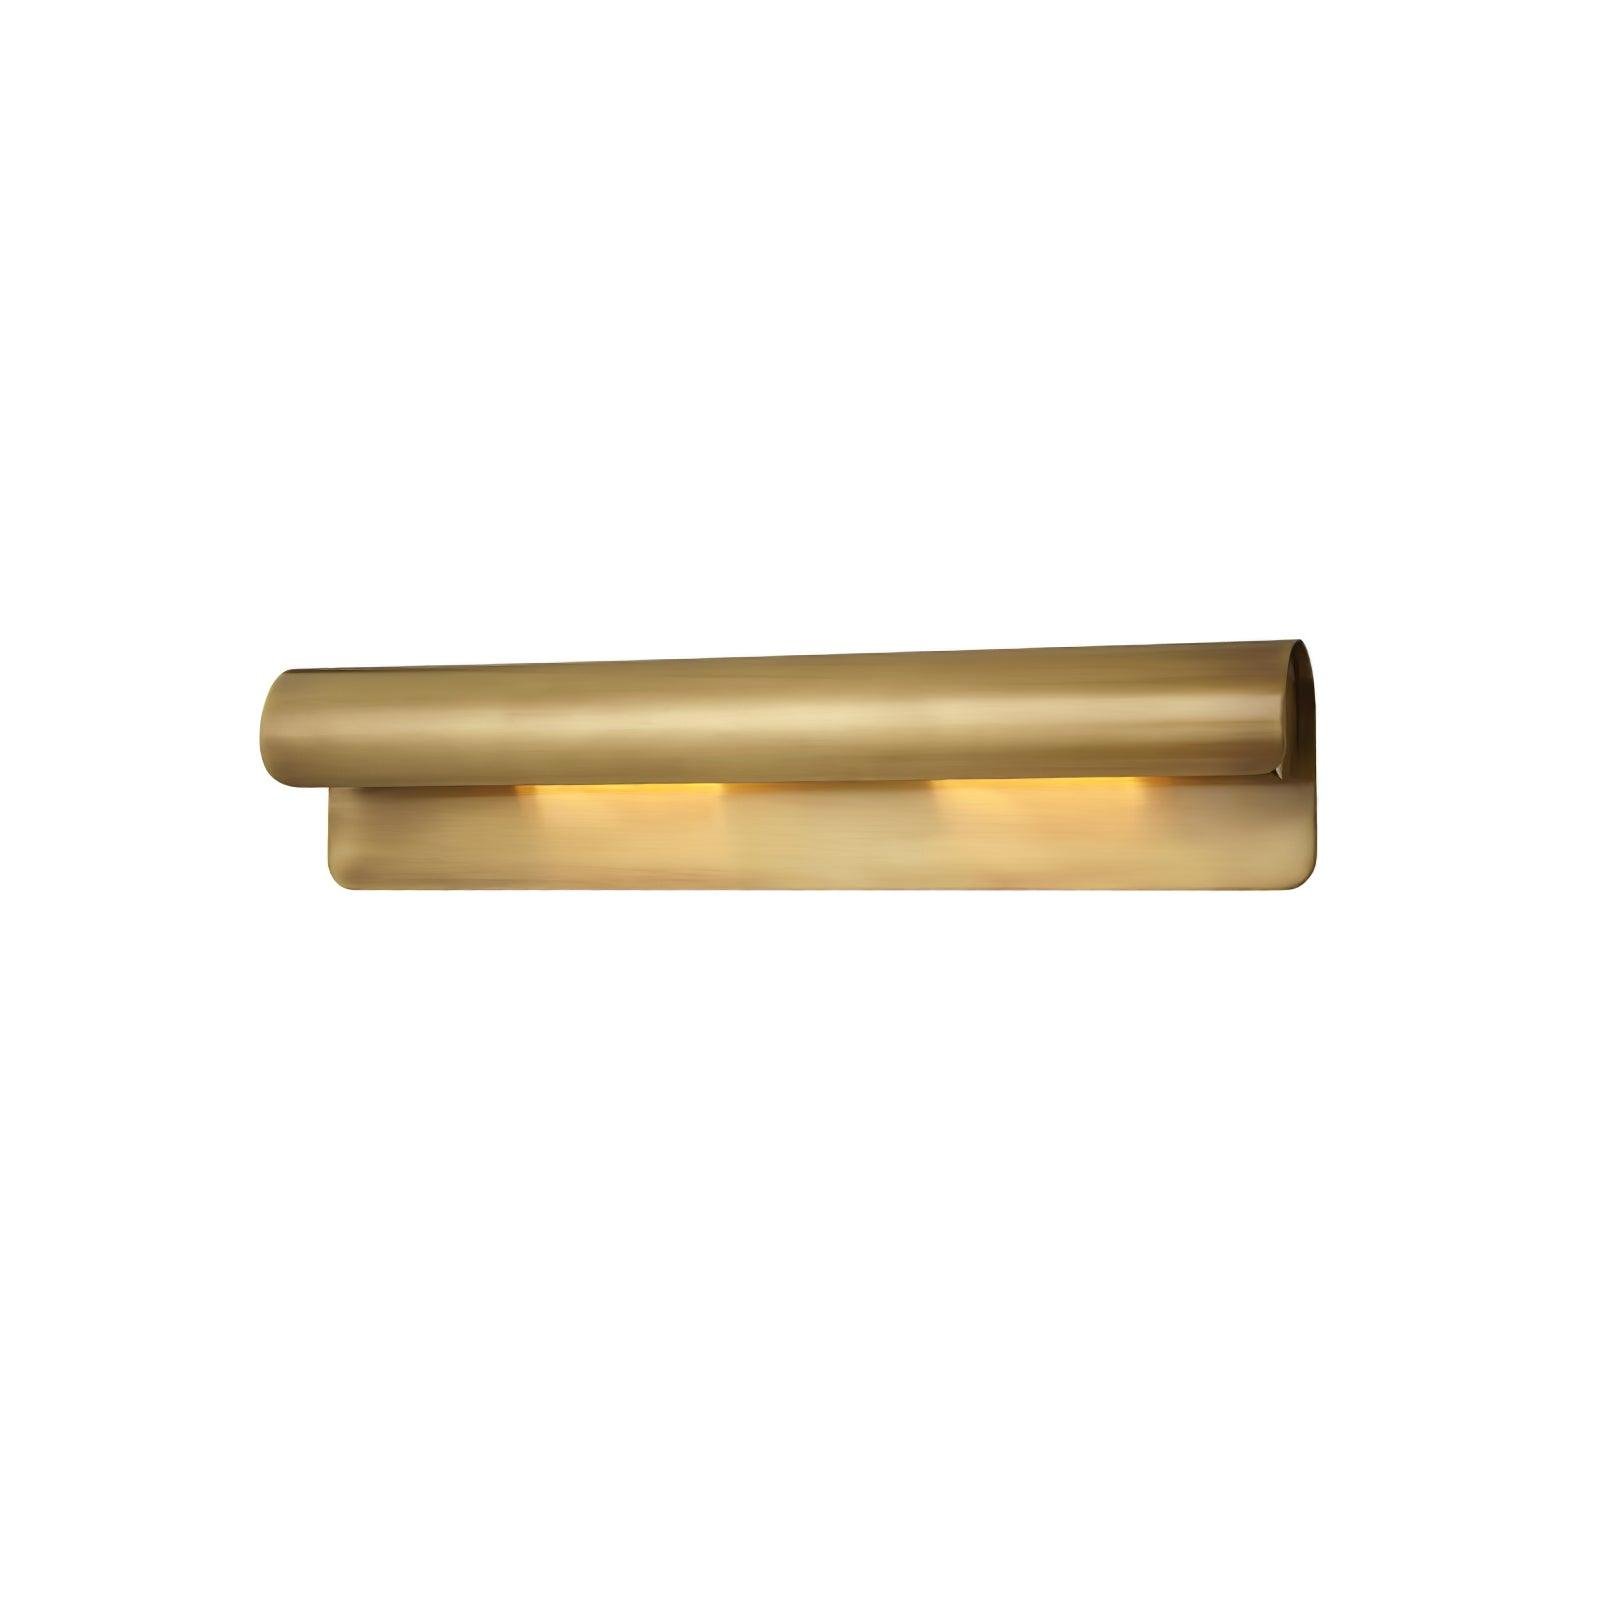 Accord Wall Sconces in Brushed Brass, Set of 2, with dimensions measuring L 19.7″ x W 4.3″ x H 5.1″.